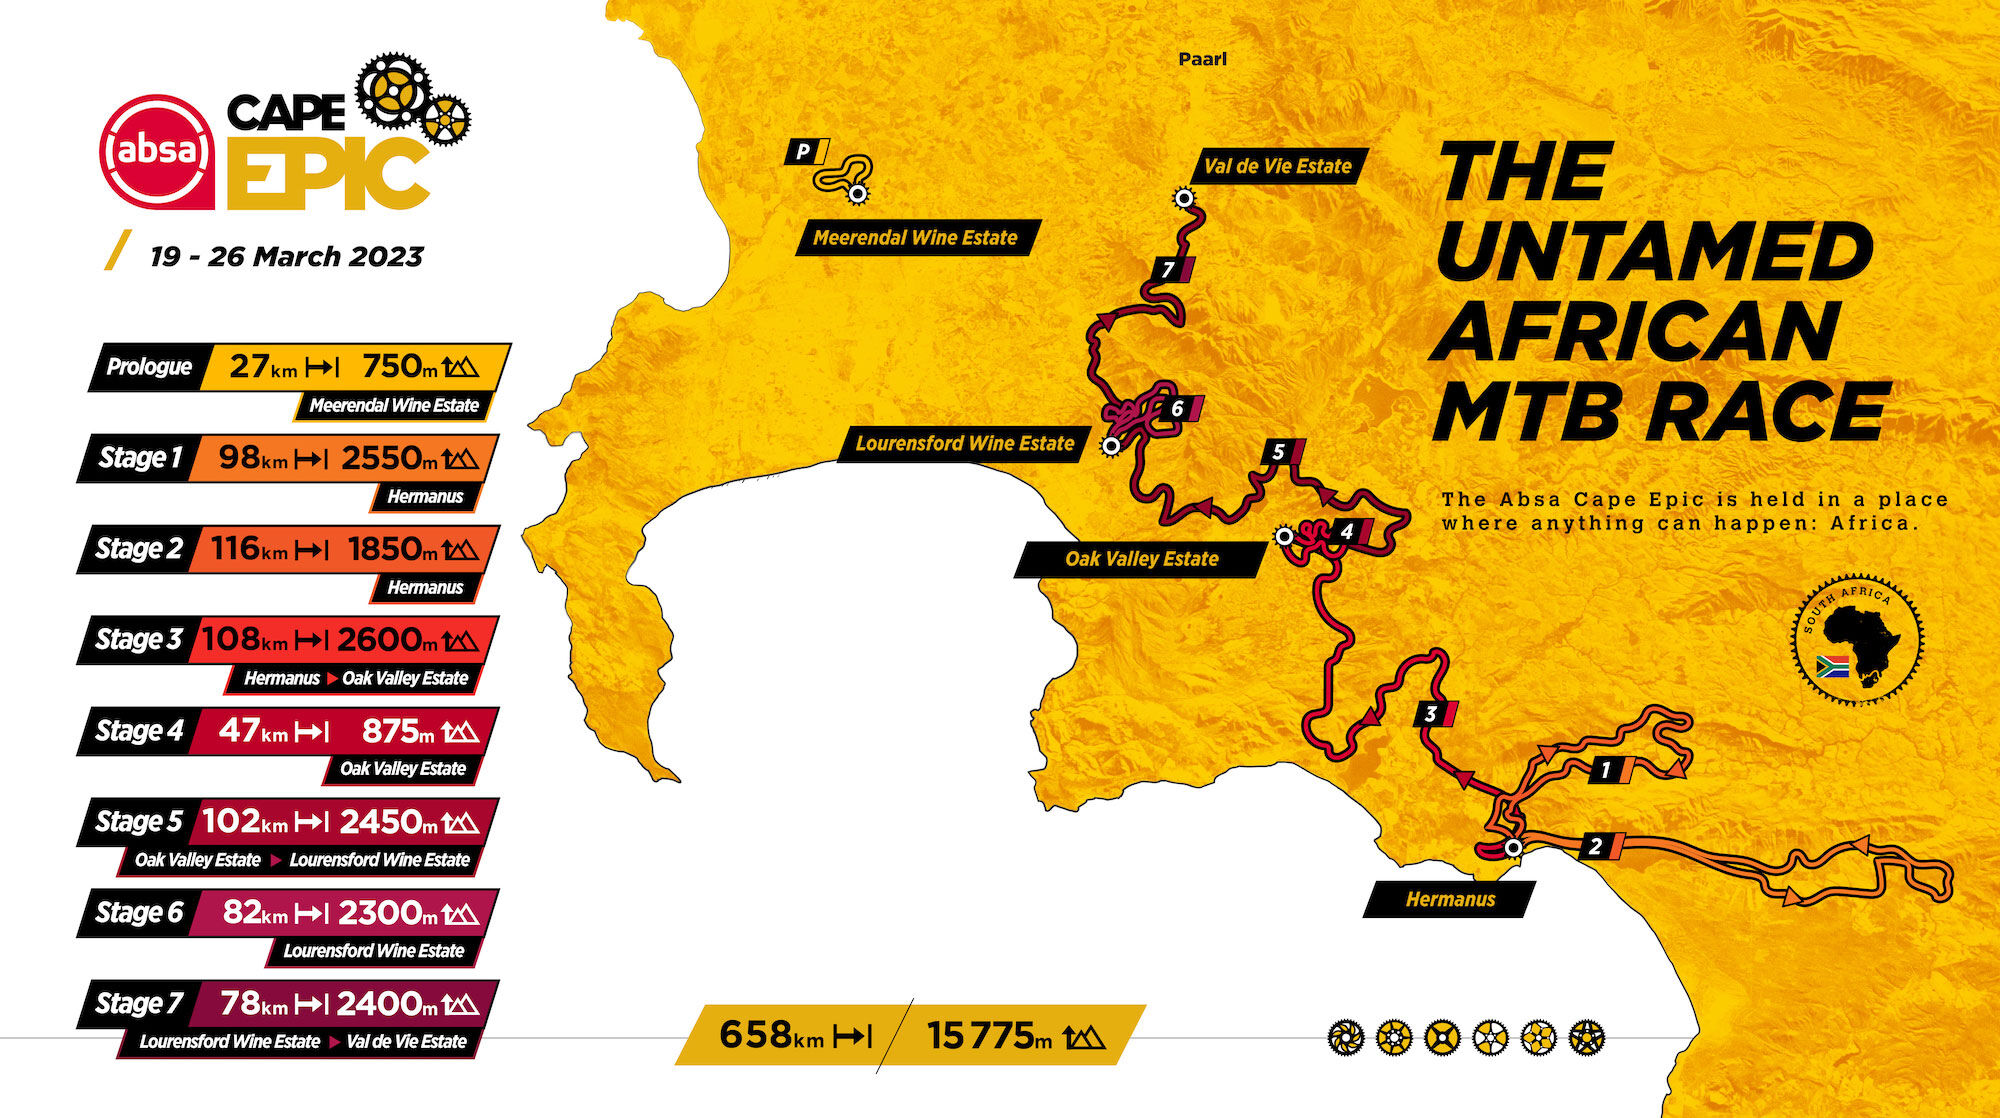 Absa Cape Epic 2023 history, route and how to watch CANYON US